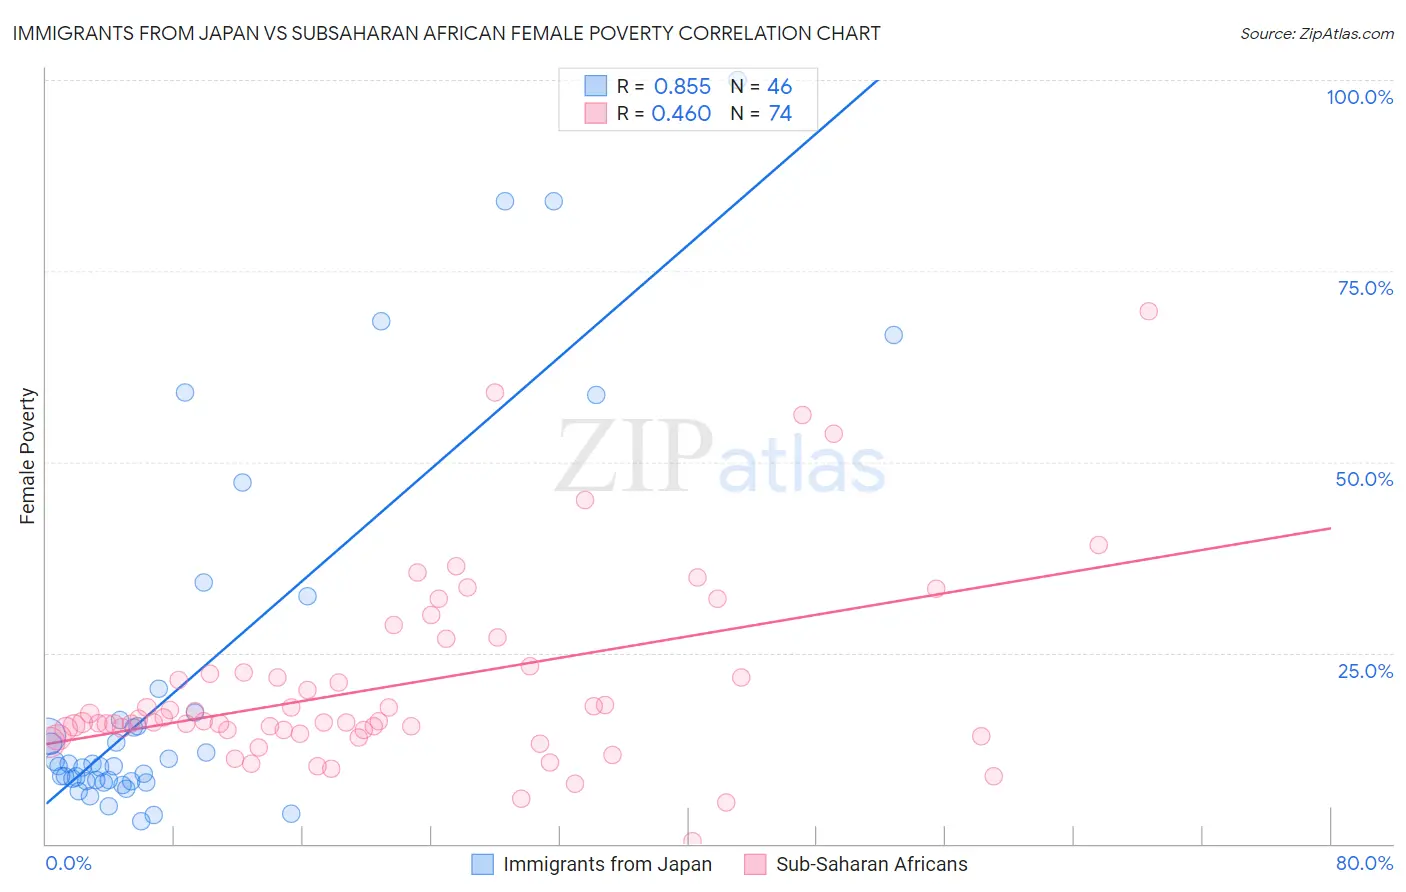 Immigrants from Japan vs Subsaharan African Female Poverty